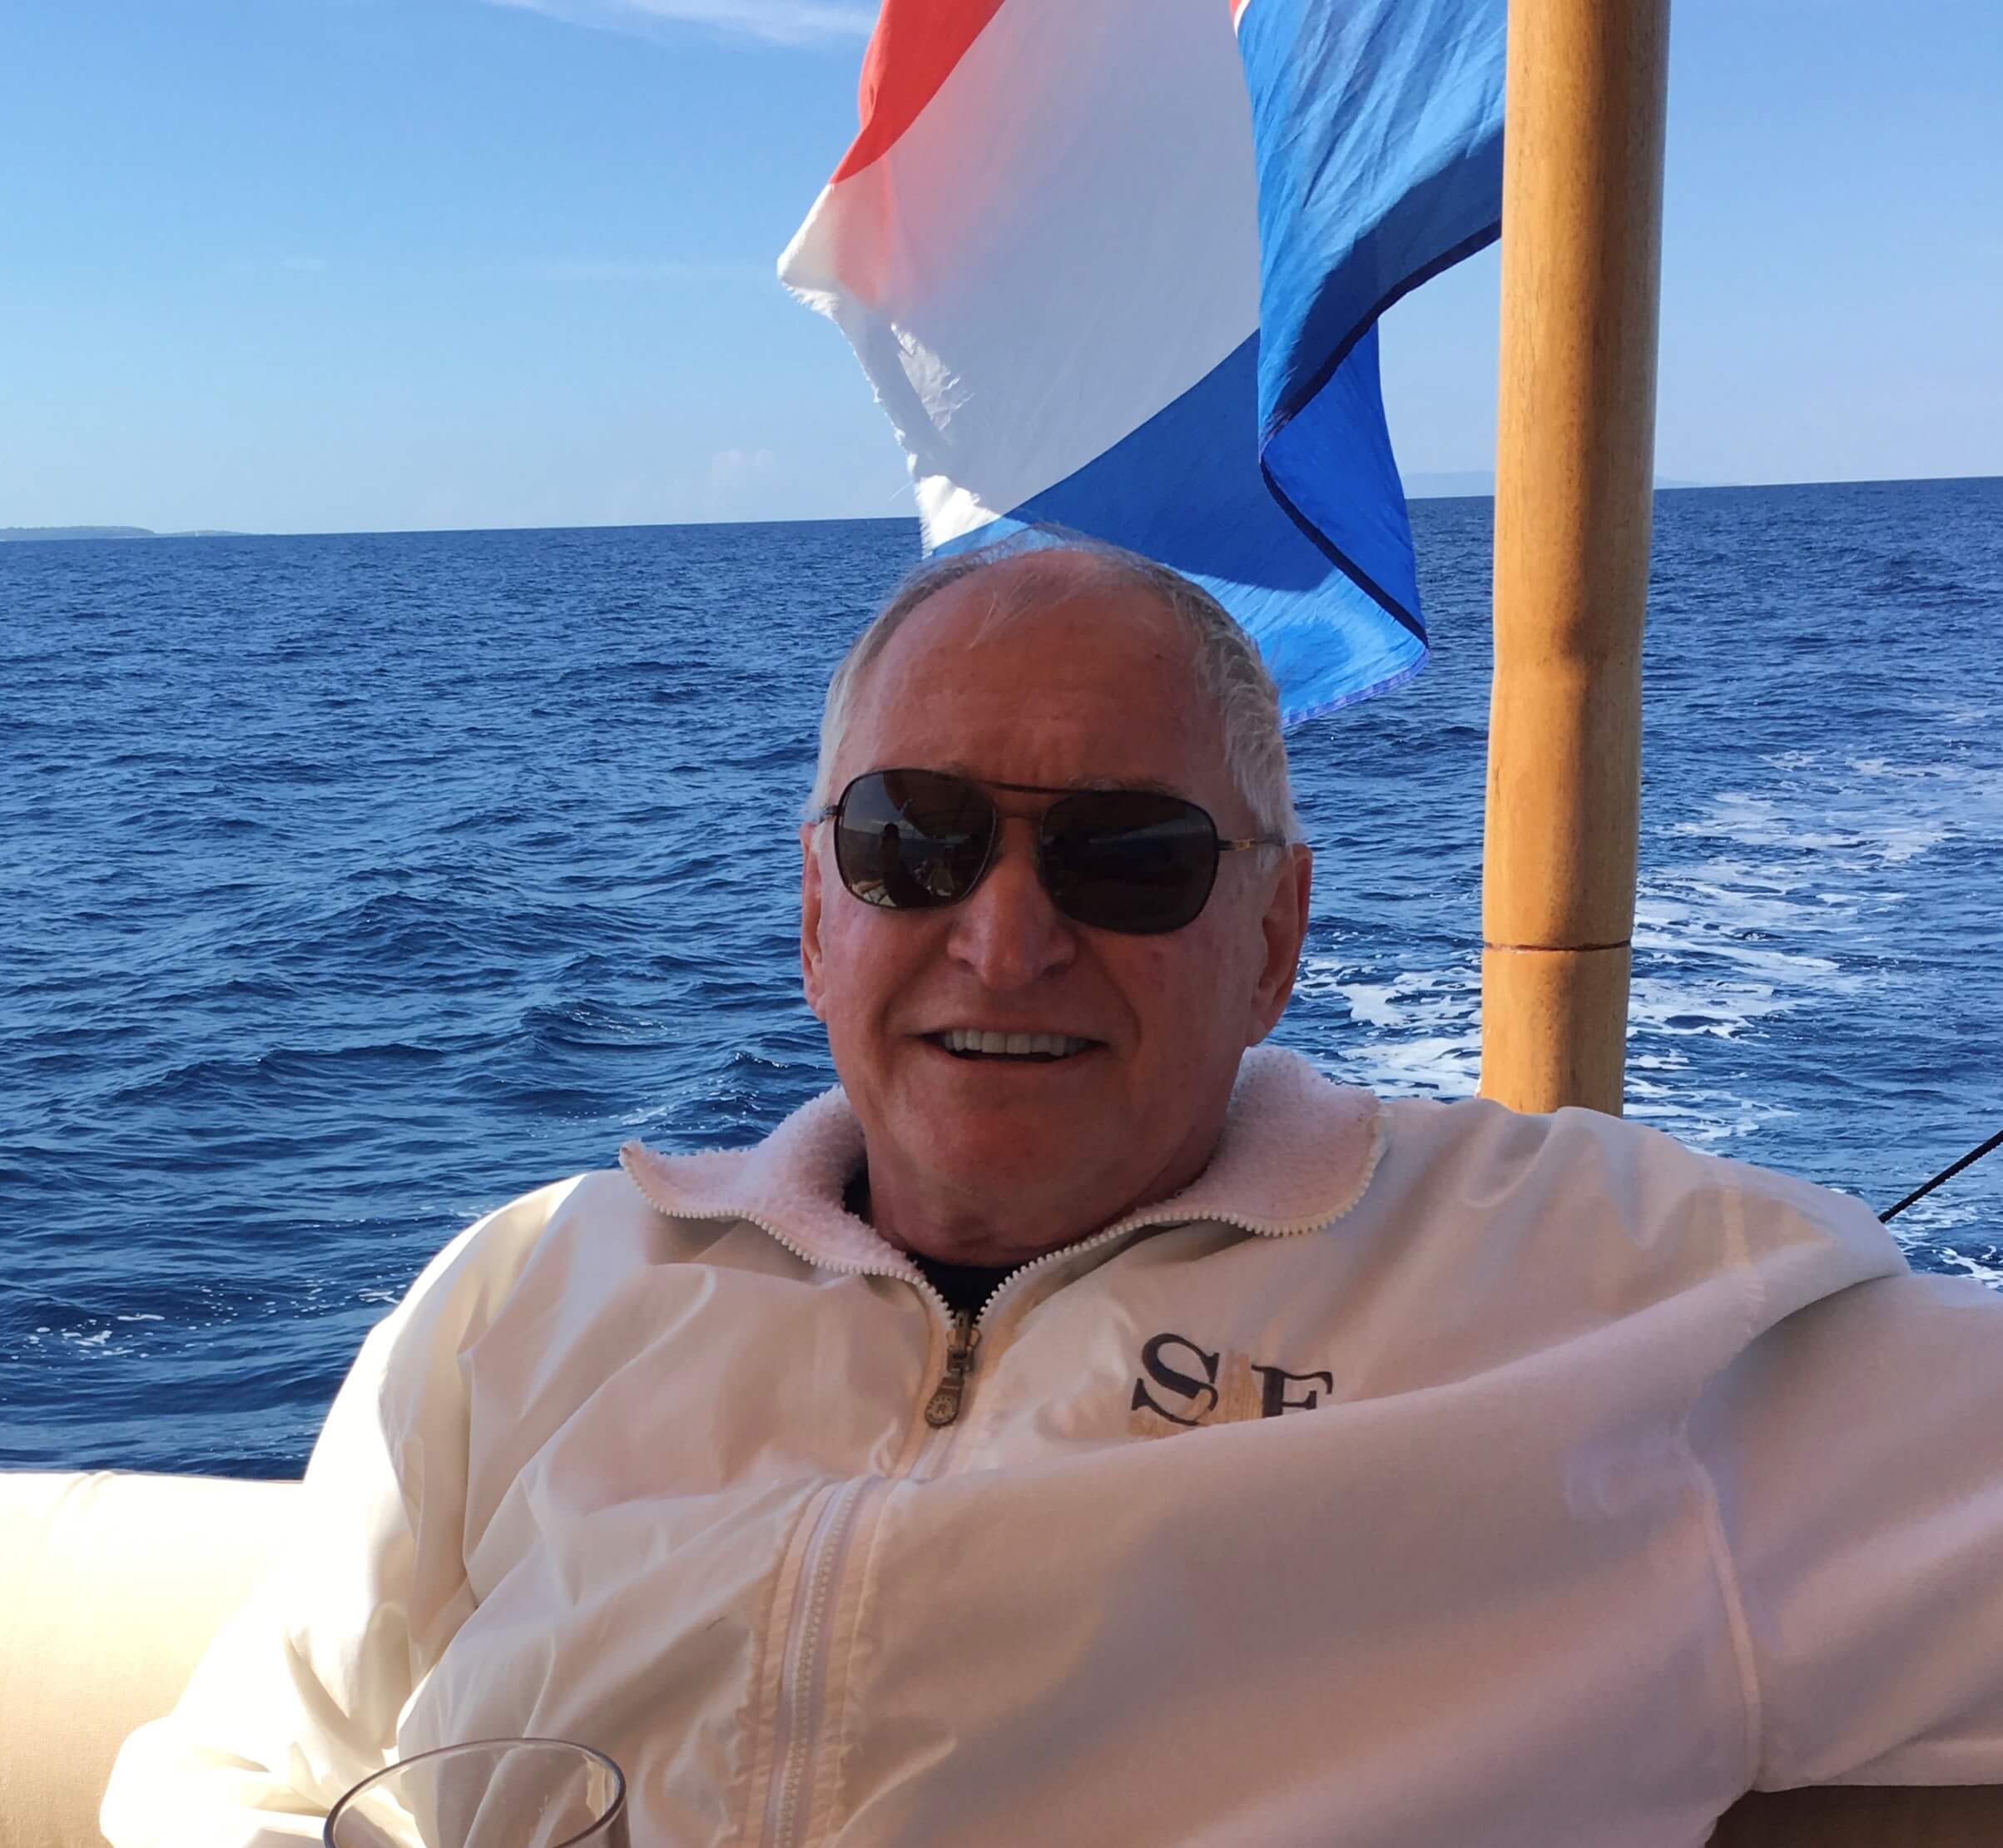 A man in sunglasses lounging on a boat